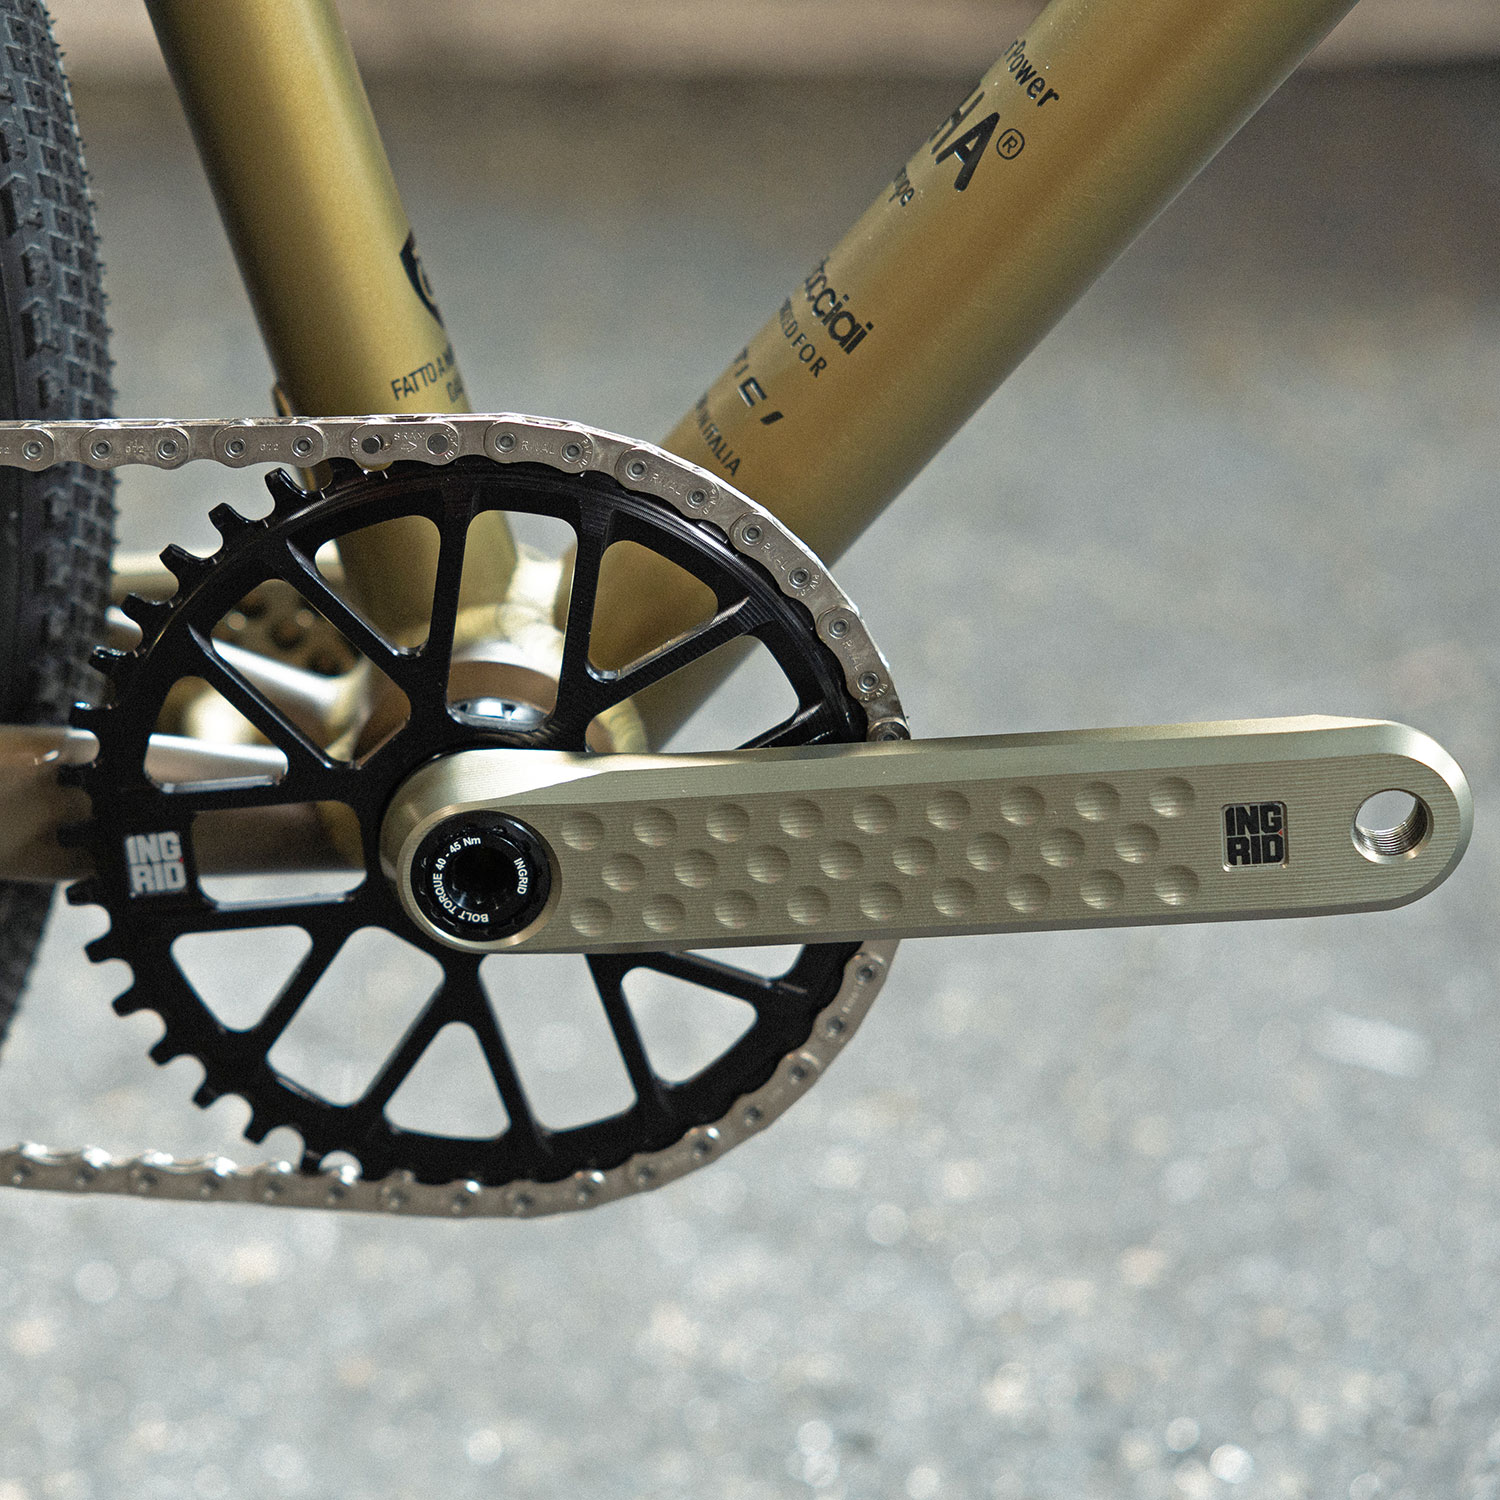 Titici Alloi AND aluminum gravel bike with GHA Silver hard anodized finish, INGRID CRS-POP crankset